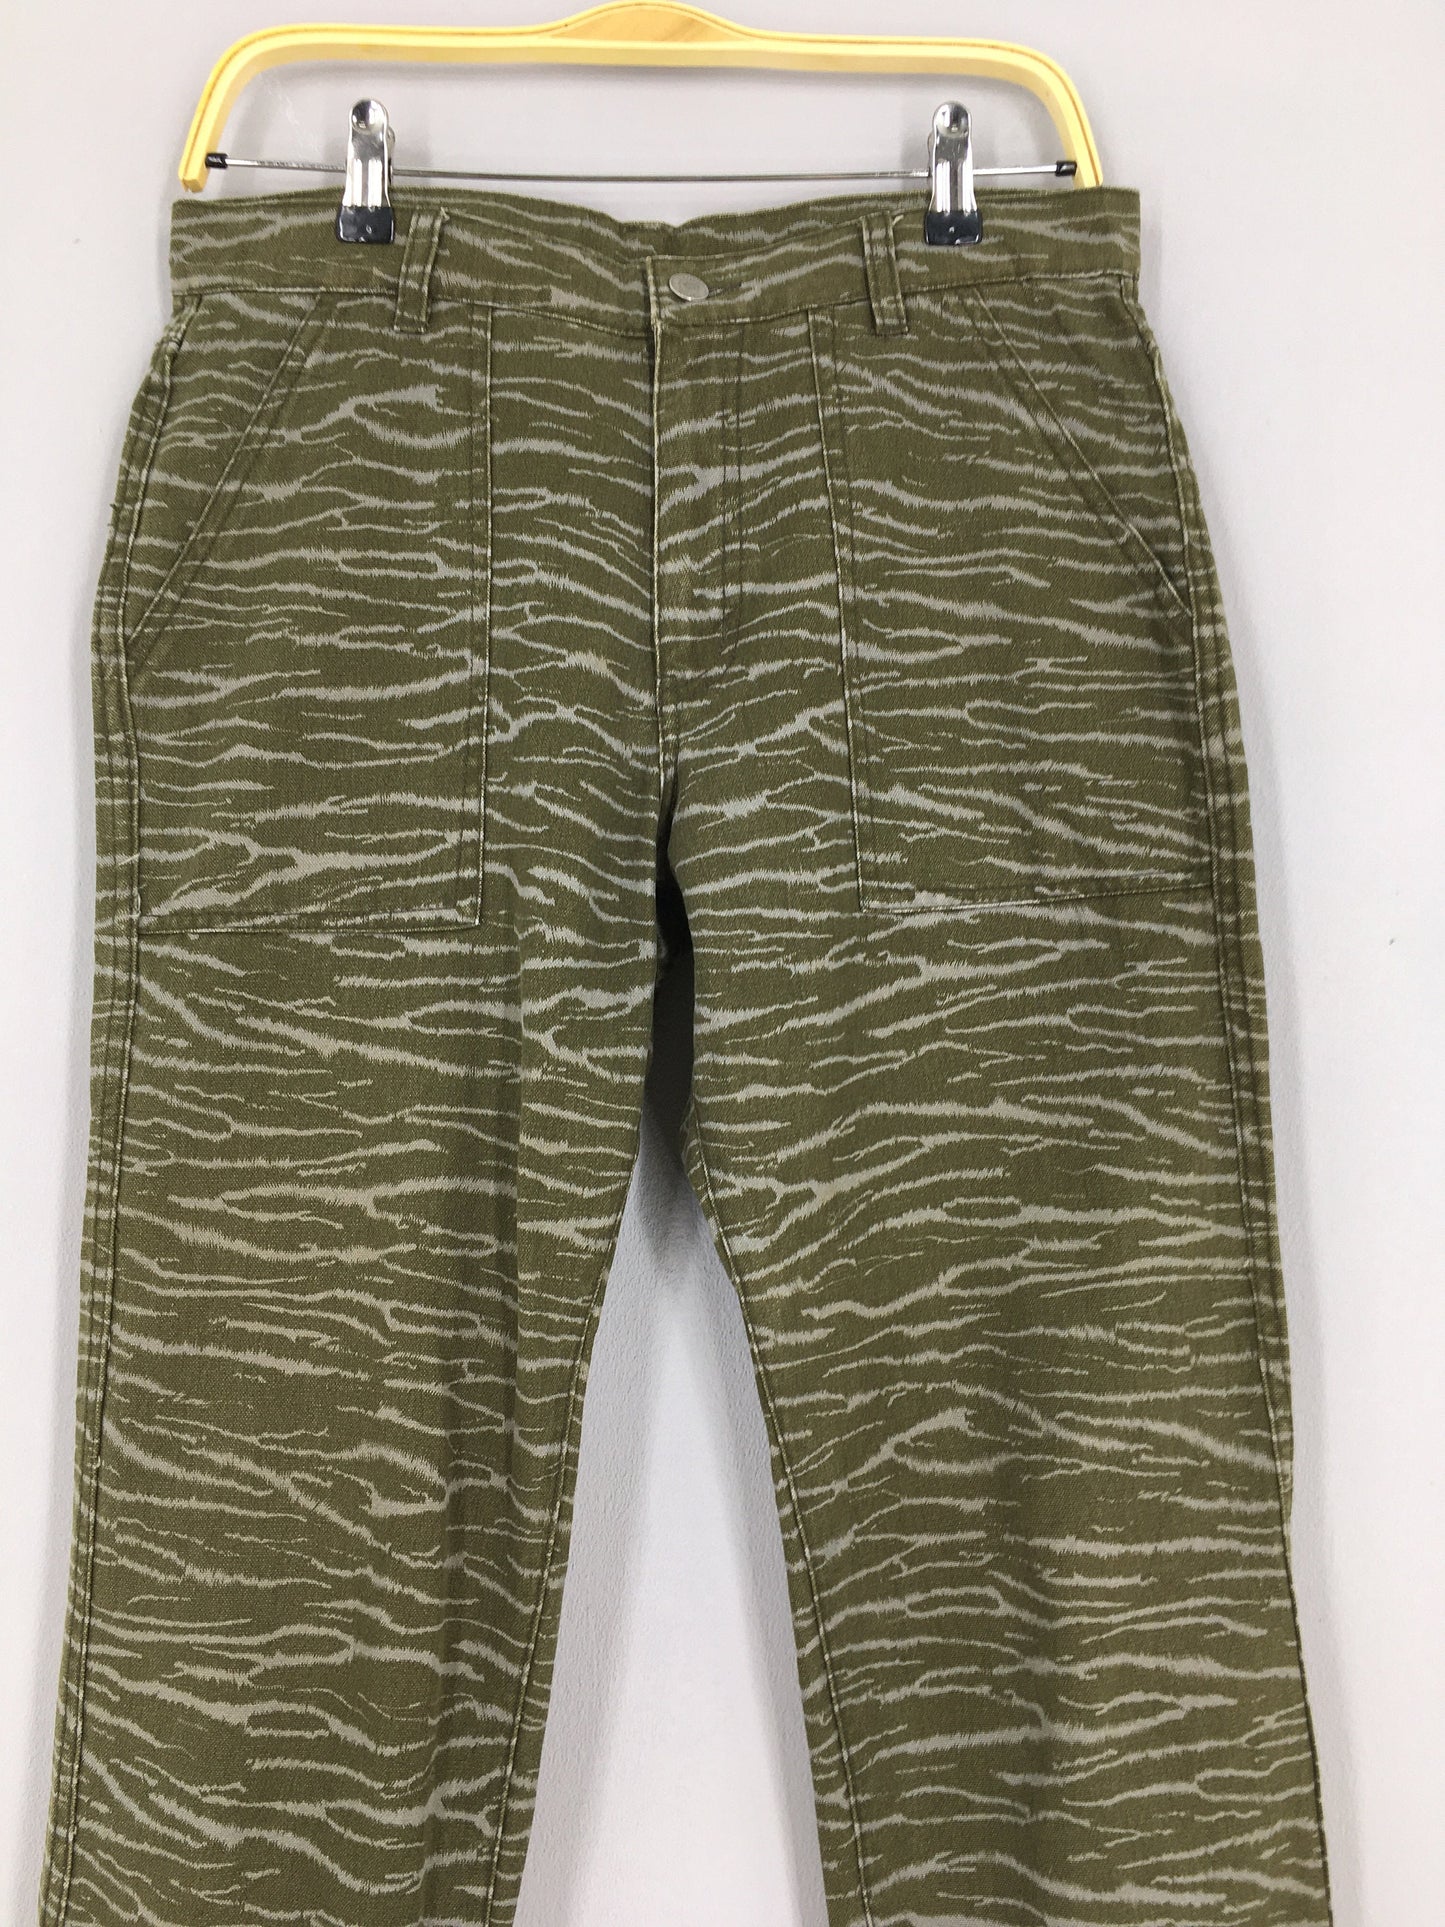 Japanese Right-On Camo Tiger Stripes Pants Size 31x31